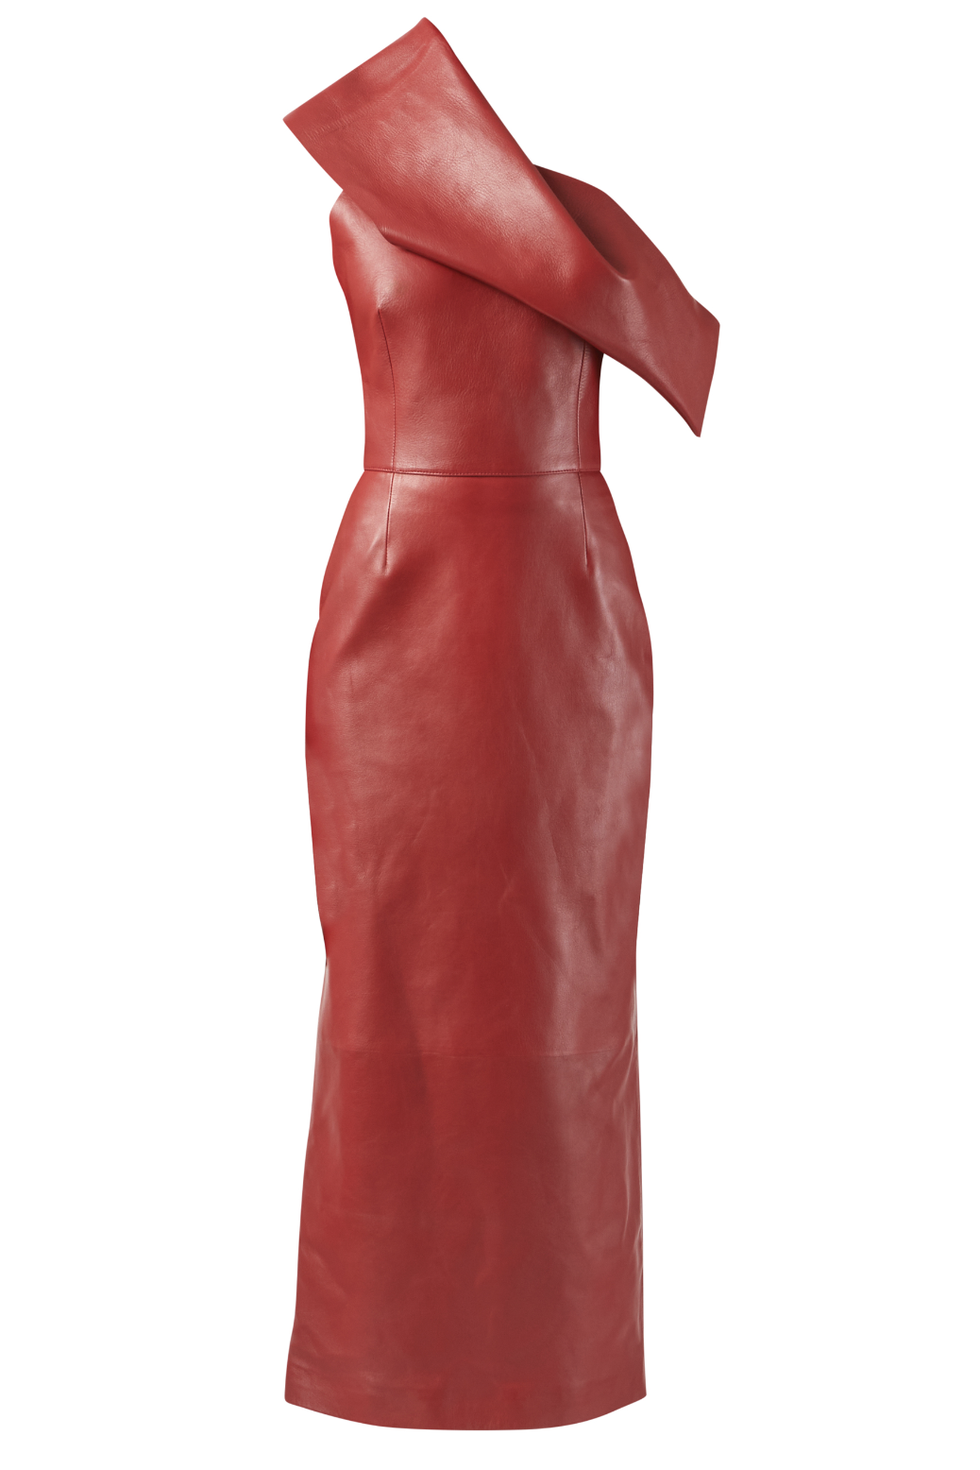 Best Leather Dresses: 15 Looks We Want to Buy Now